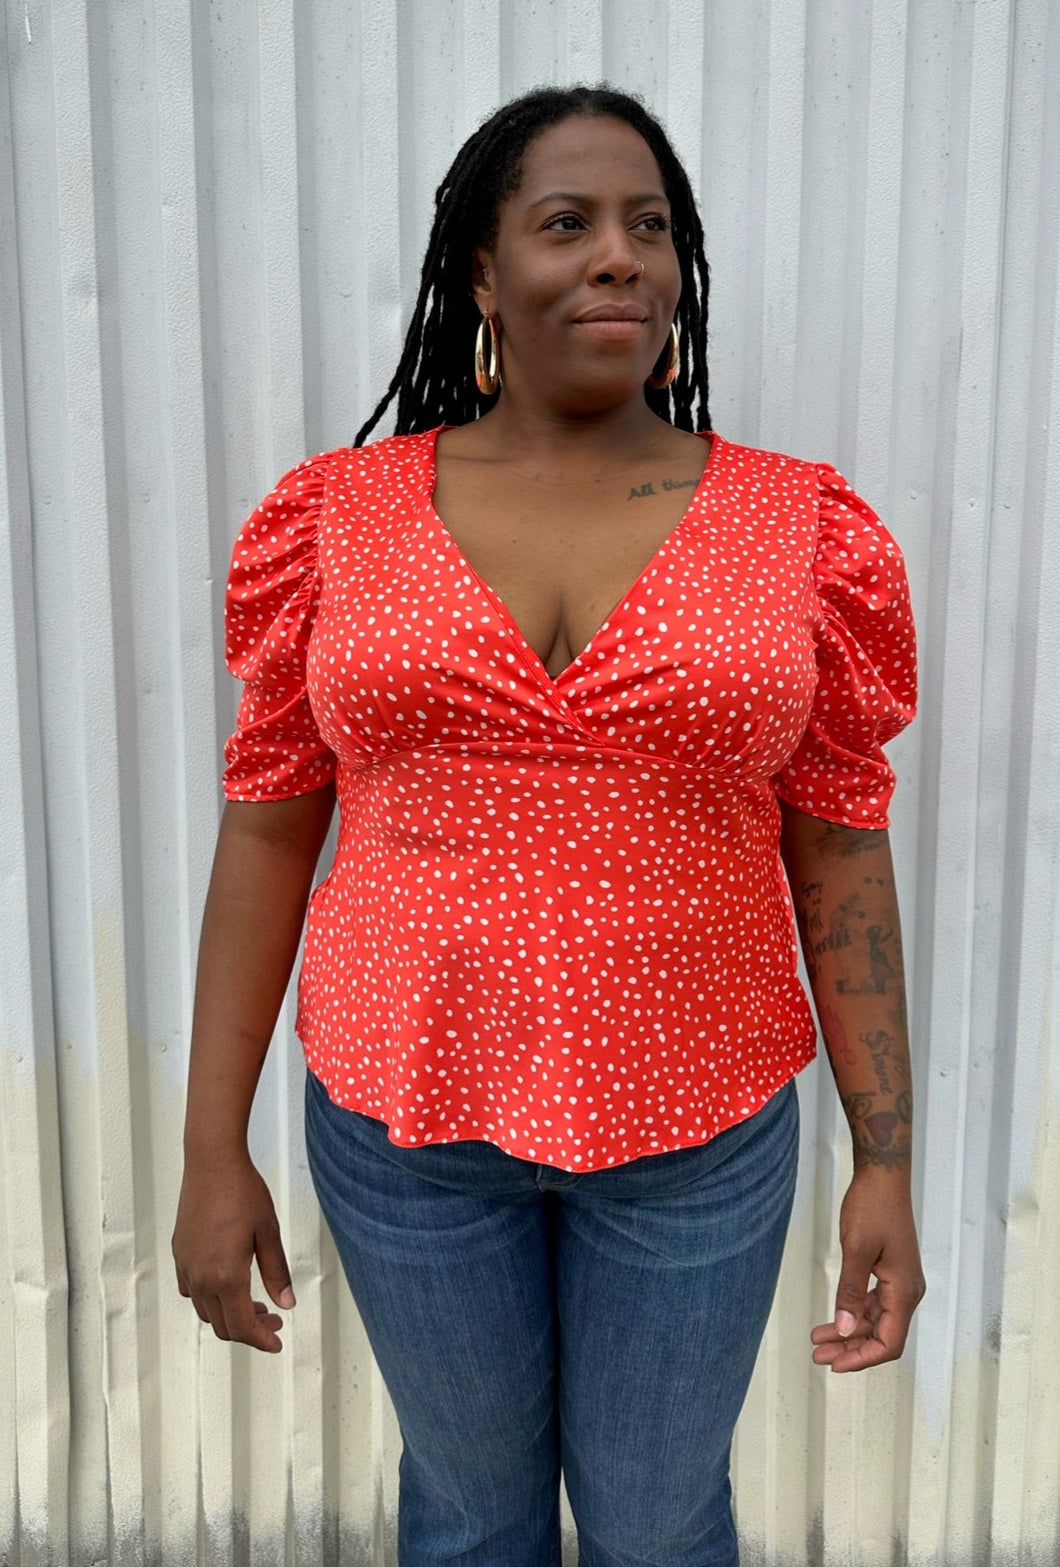 Front view of a size 14 ASOS bright red and white polka dot v-neck puff sleeve blouse styled with medium wash denim on a size 14/16 model. The photo is taken outside in natural lighting.